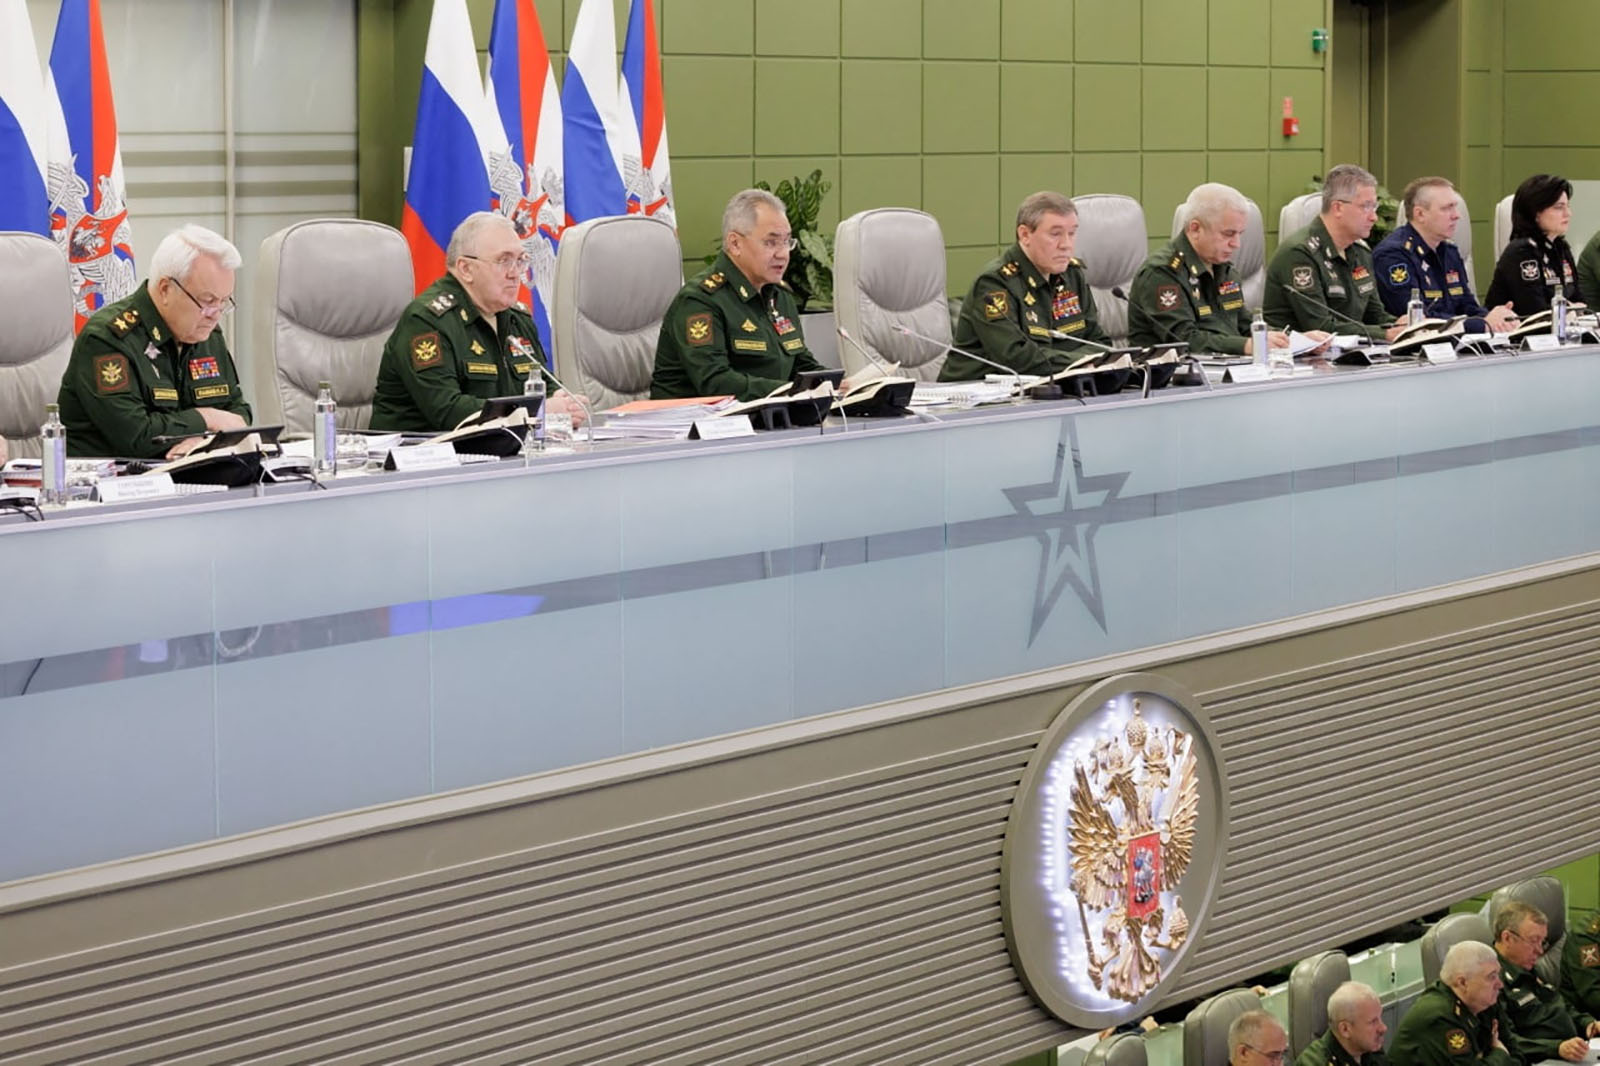 Russian Defense Minister Sergei Shoigu chairs a meeting at the National Defense Control Center in Moscow, Russia, on November 1.